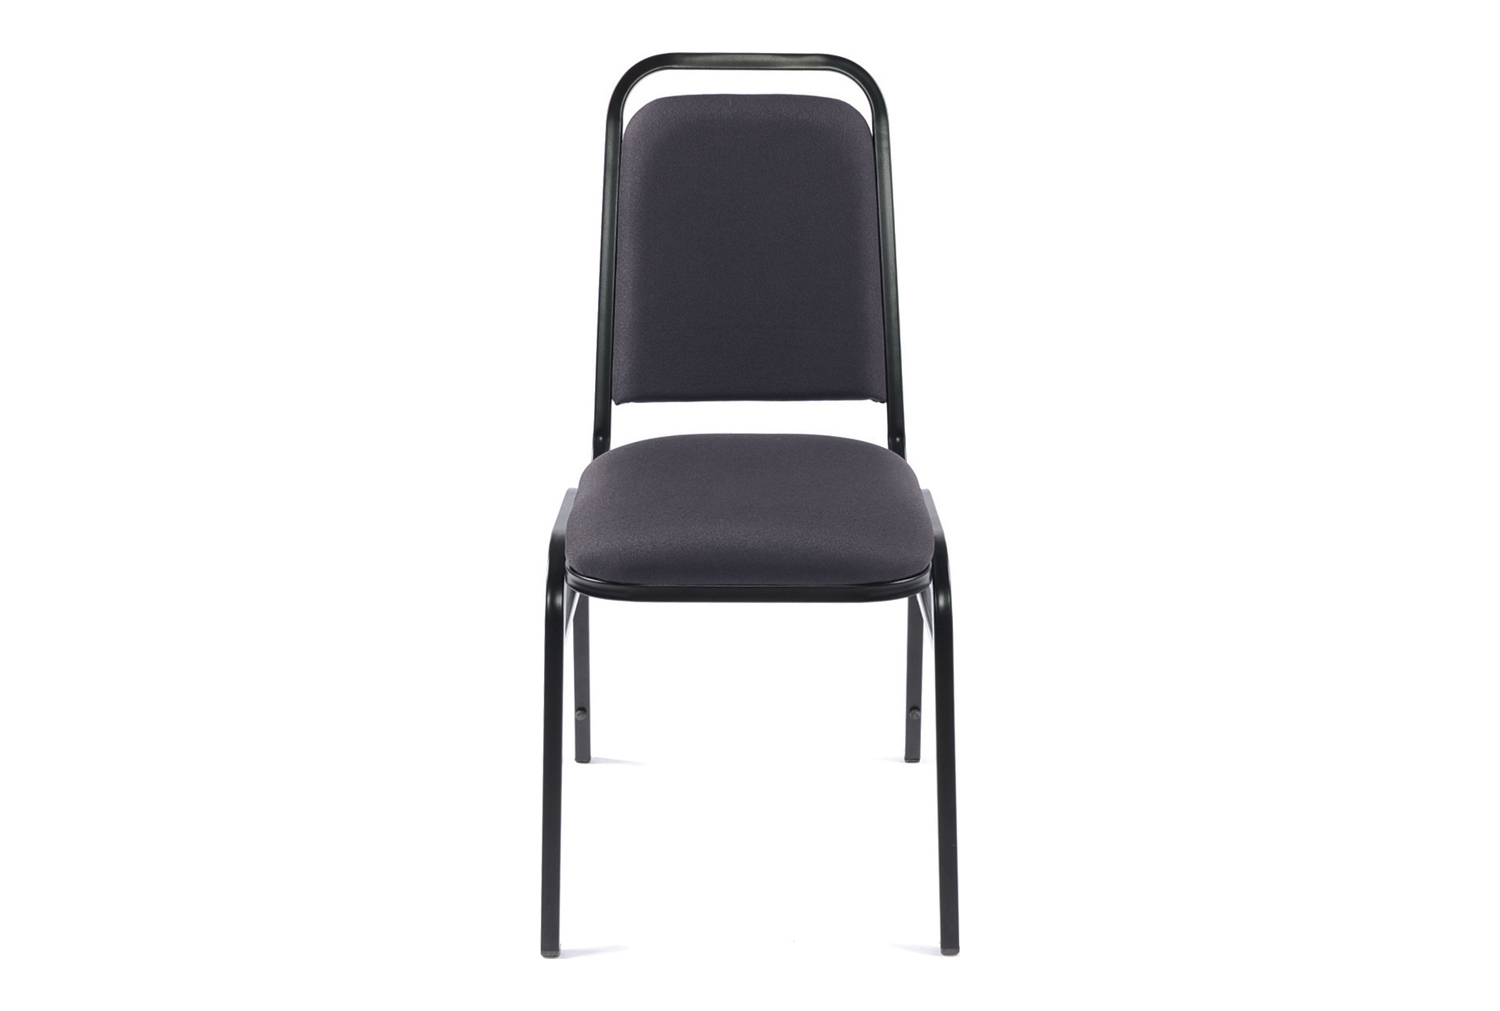 Qty 10 - Oxford Banquet Office Chair, Charcoal